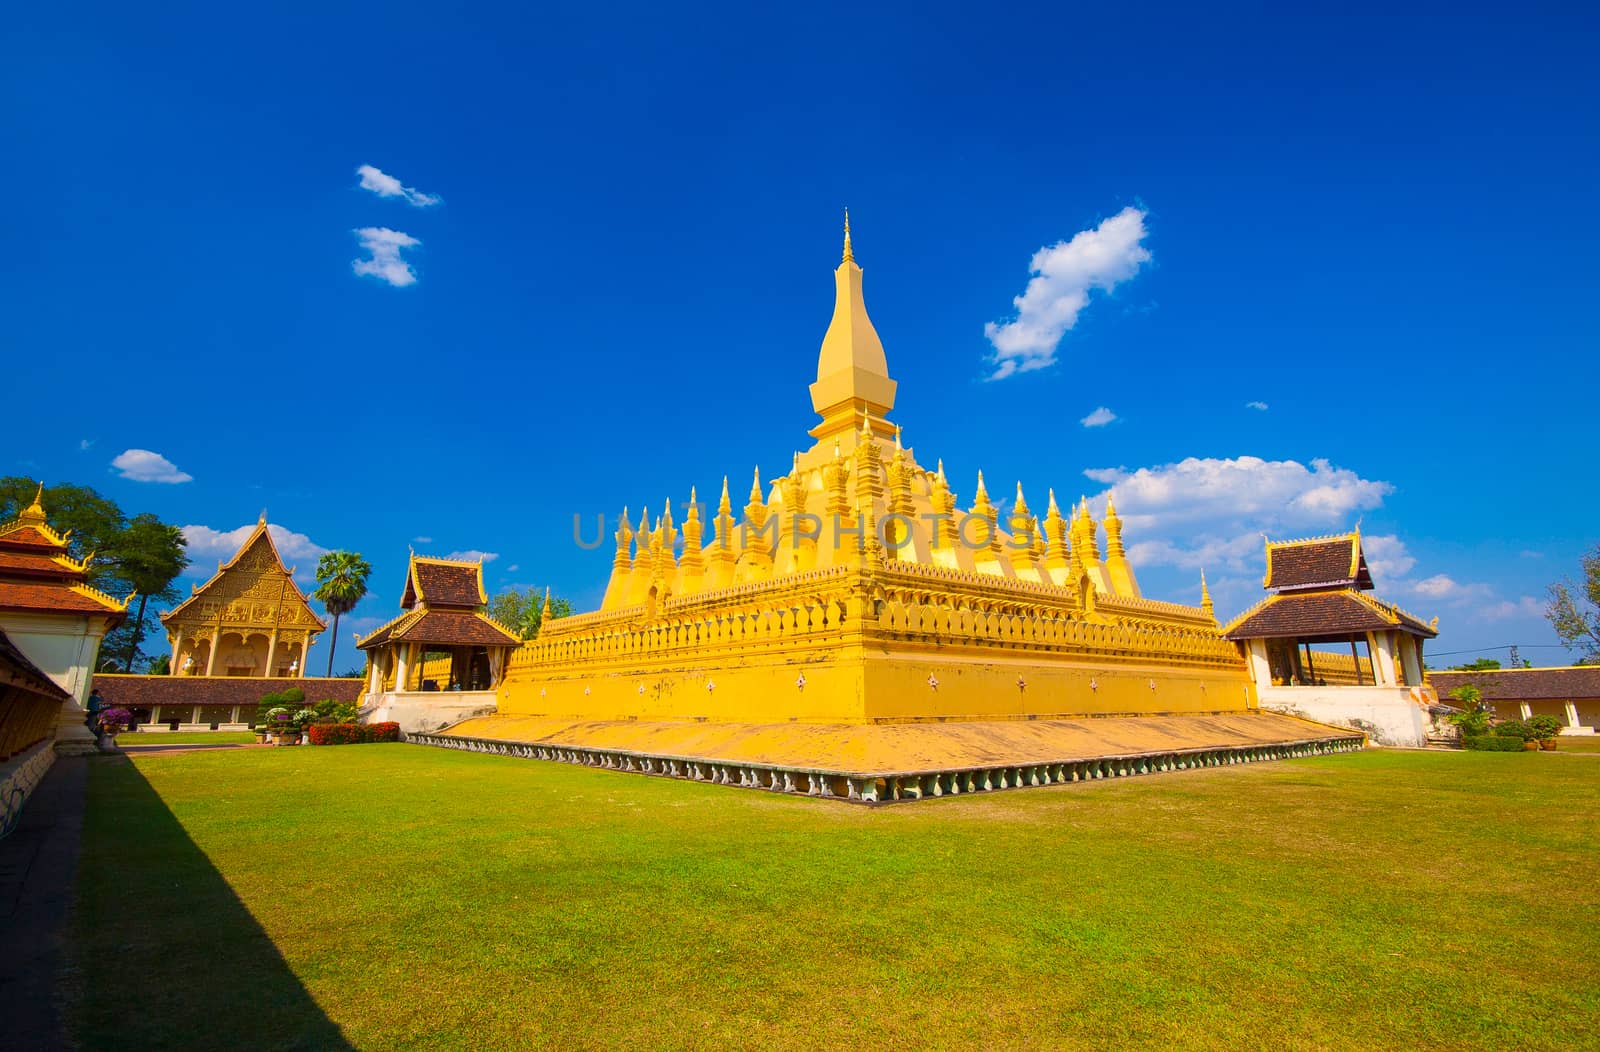 Pha That Luang, the golden stupa on the outskirts of Vientiane, Laos, that has become a national symbol for the nation. Photo taken during sunrise.